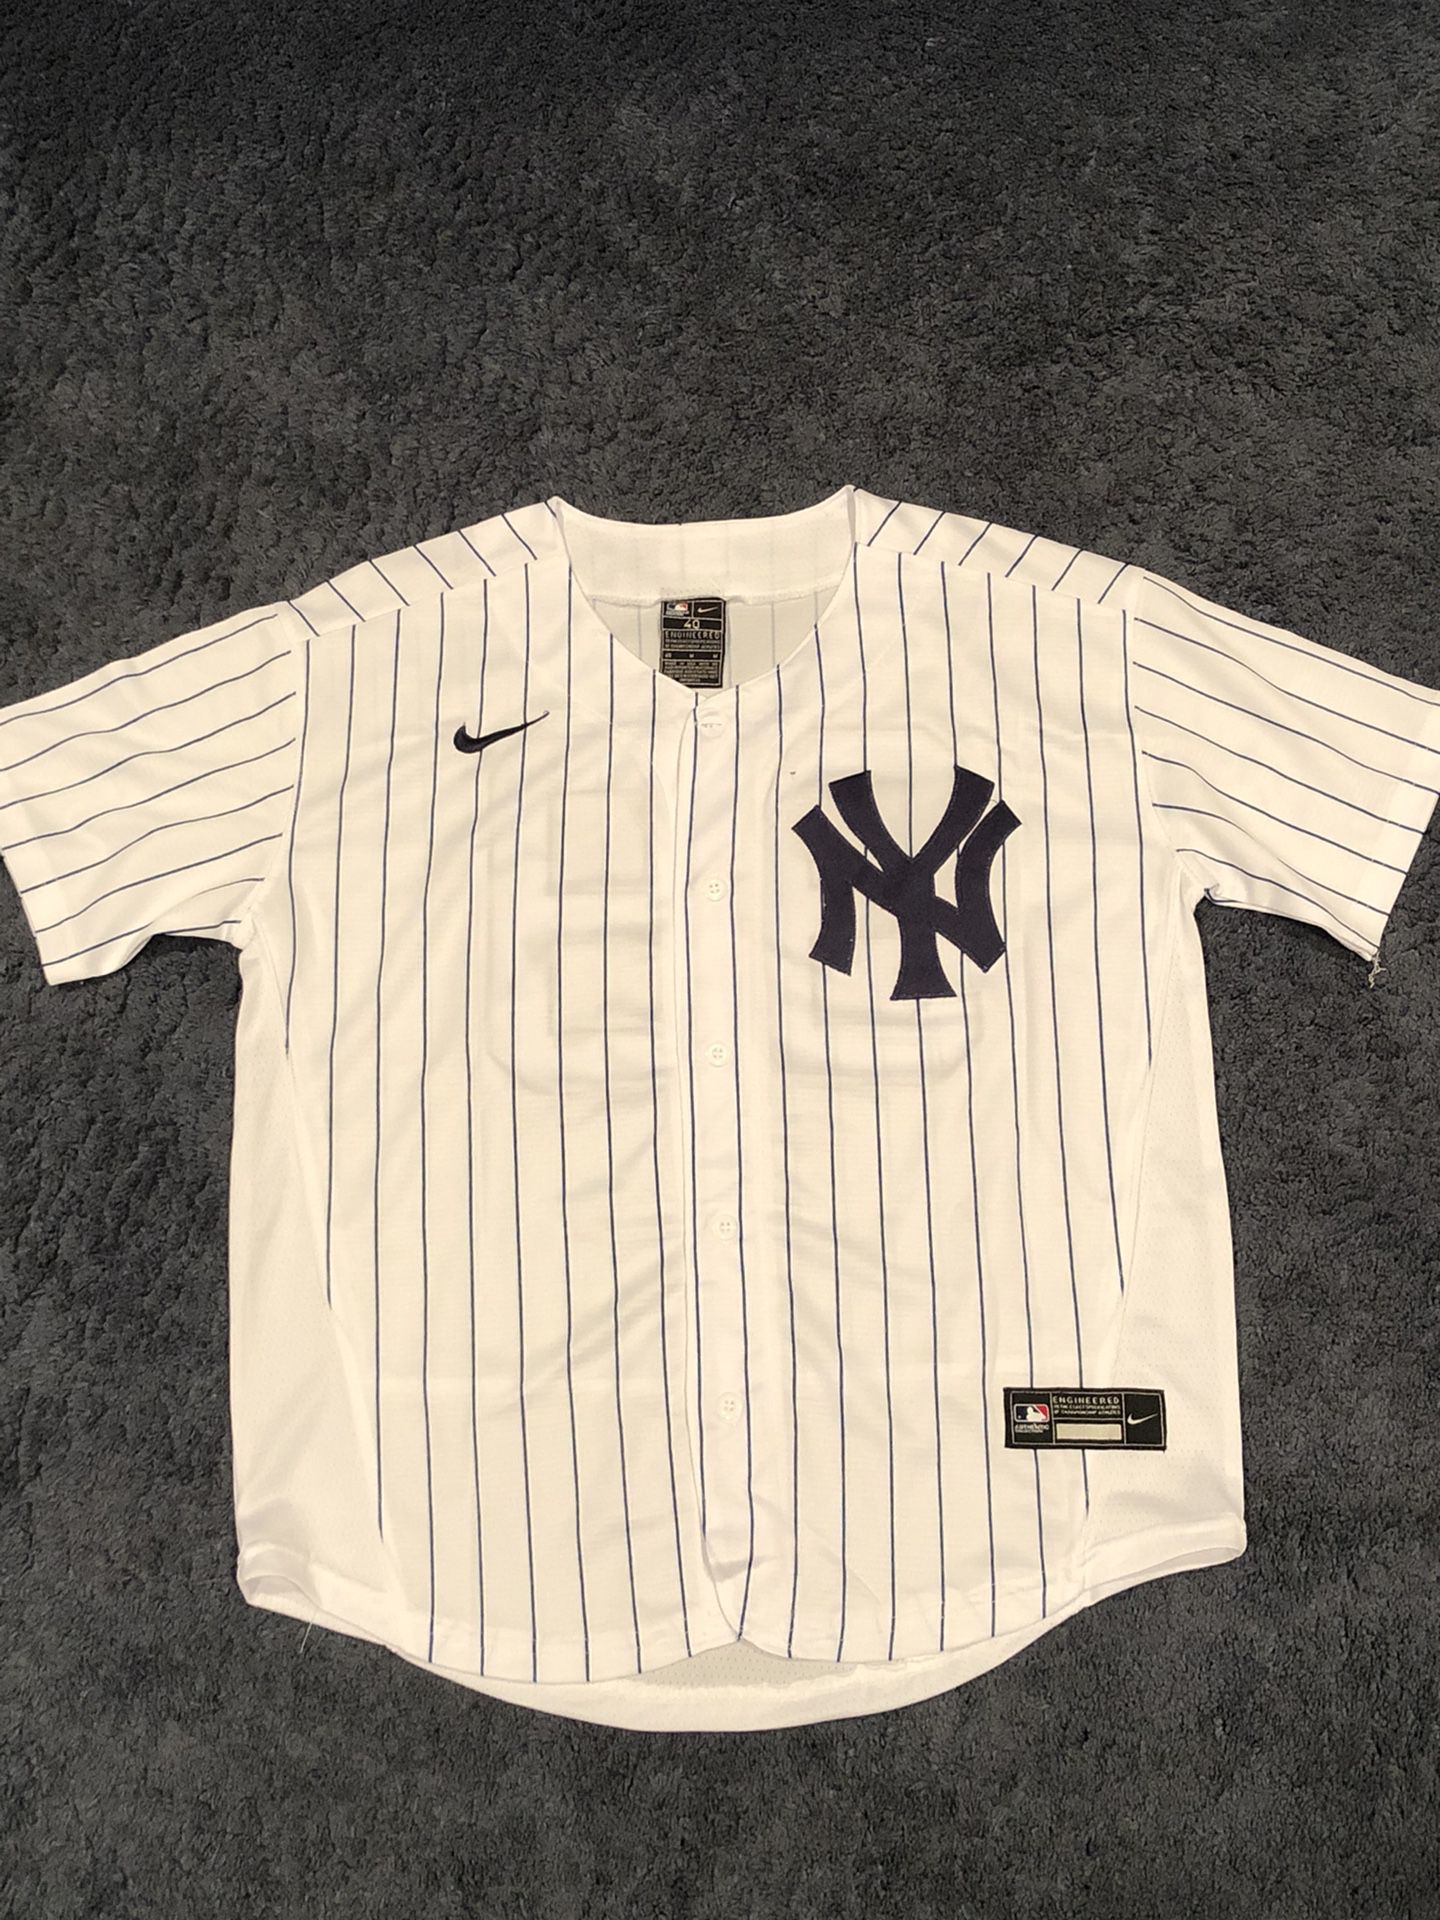 Aaron Judge New York Yankees MLB 2018 jersey xl! for Sale in Tenafly, NJ -  OfferUp